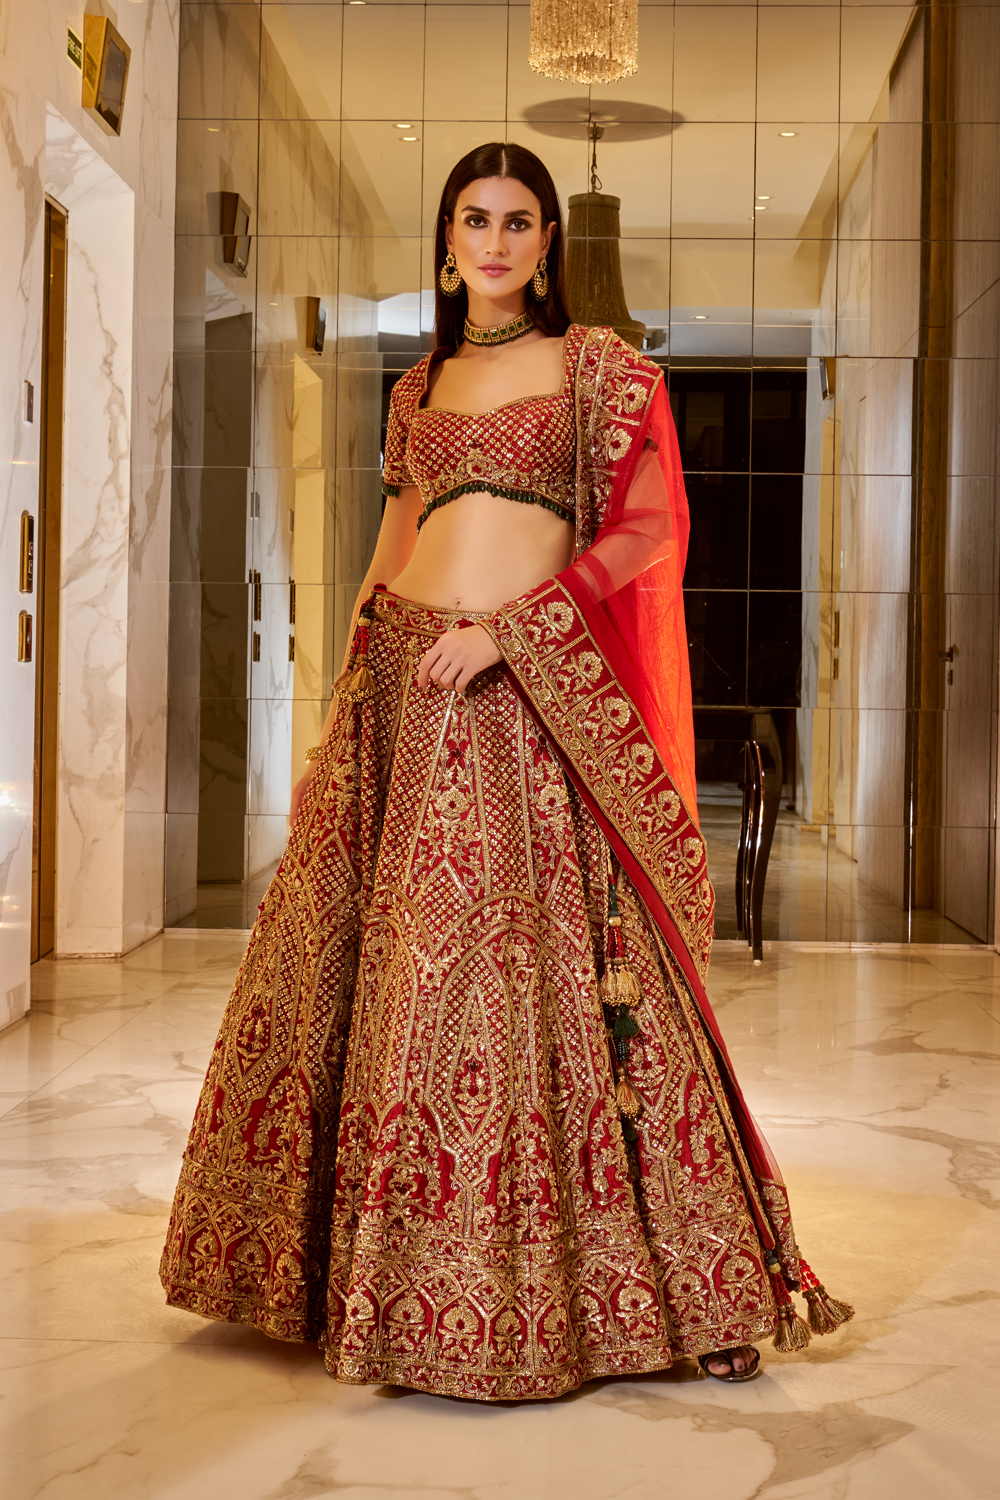 DEEP RED TRADITIONAL BRIDAL LEHENGA SET WITH GOLD EMBROIDERY PAIRED WITH A  MATCHING DUPATTA, JADE GREEN TASSELS AND ALL OVER GOLD EMBELLISHMENTS -  Seasons India